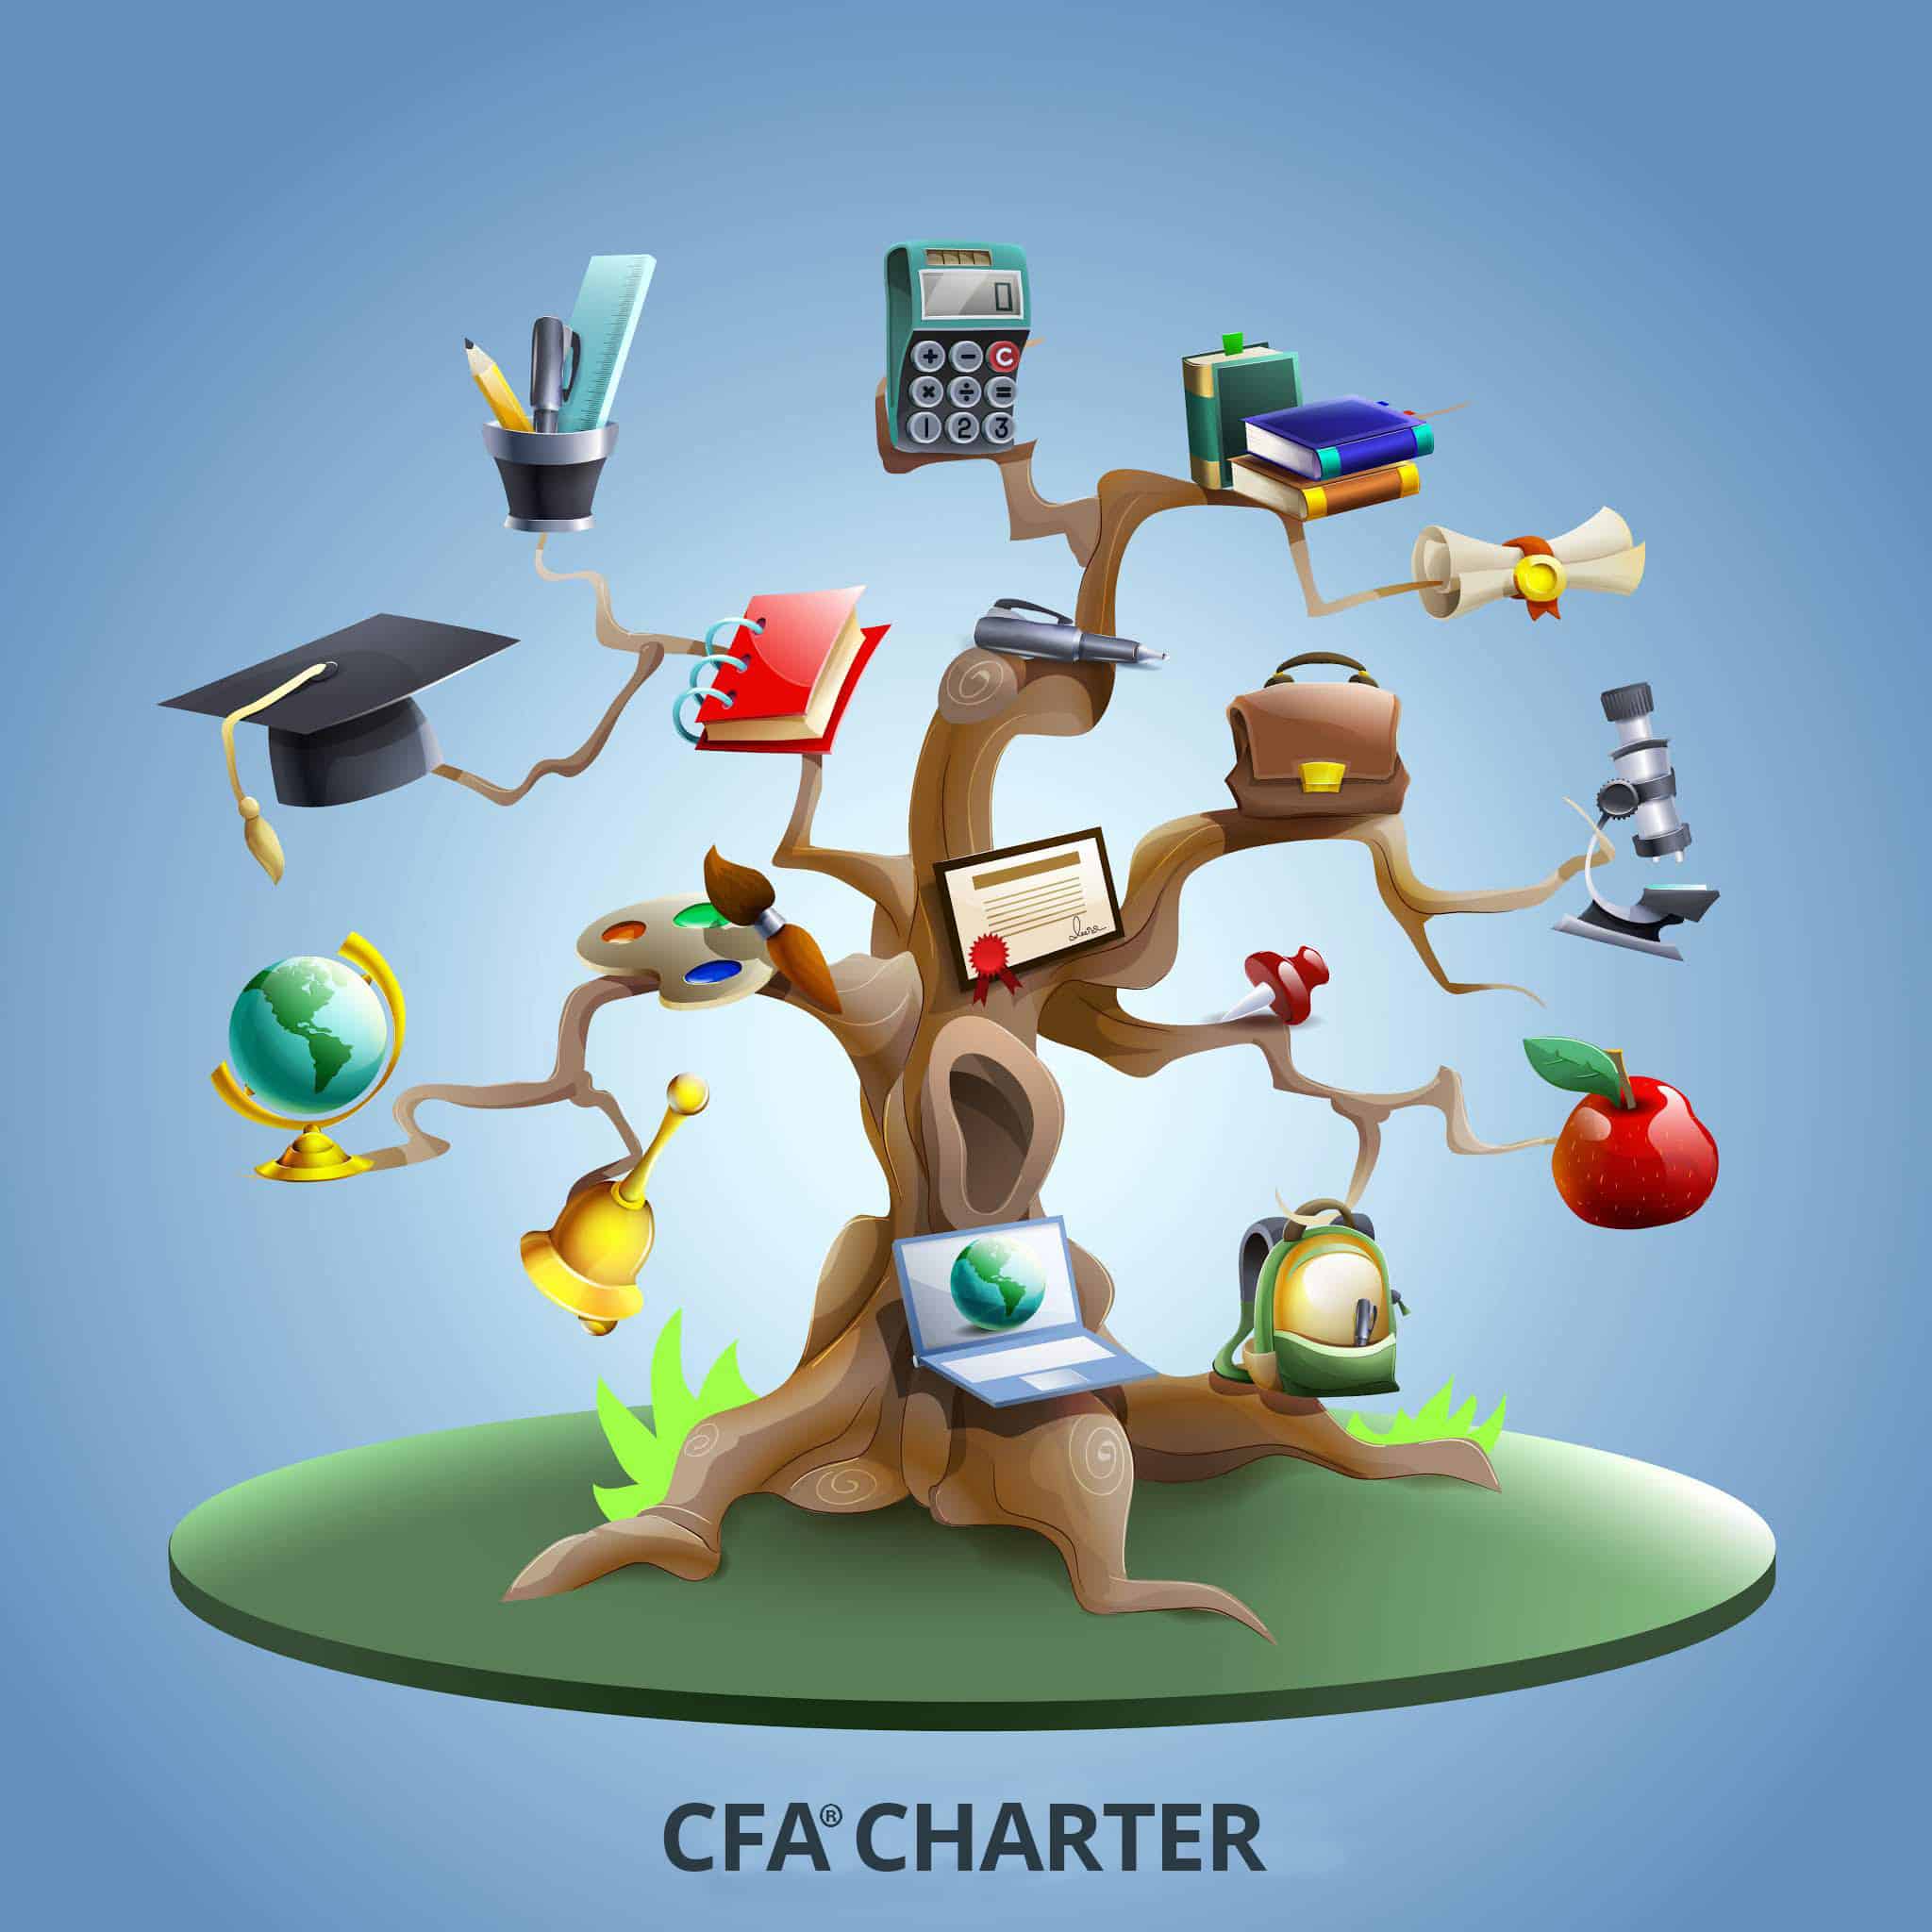 What Can I Do with My CFA® charter?